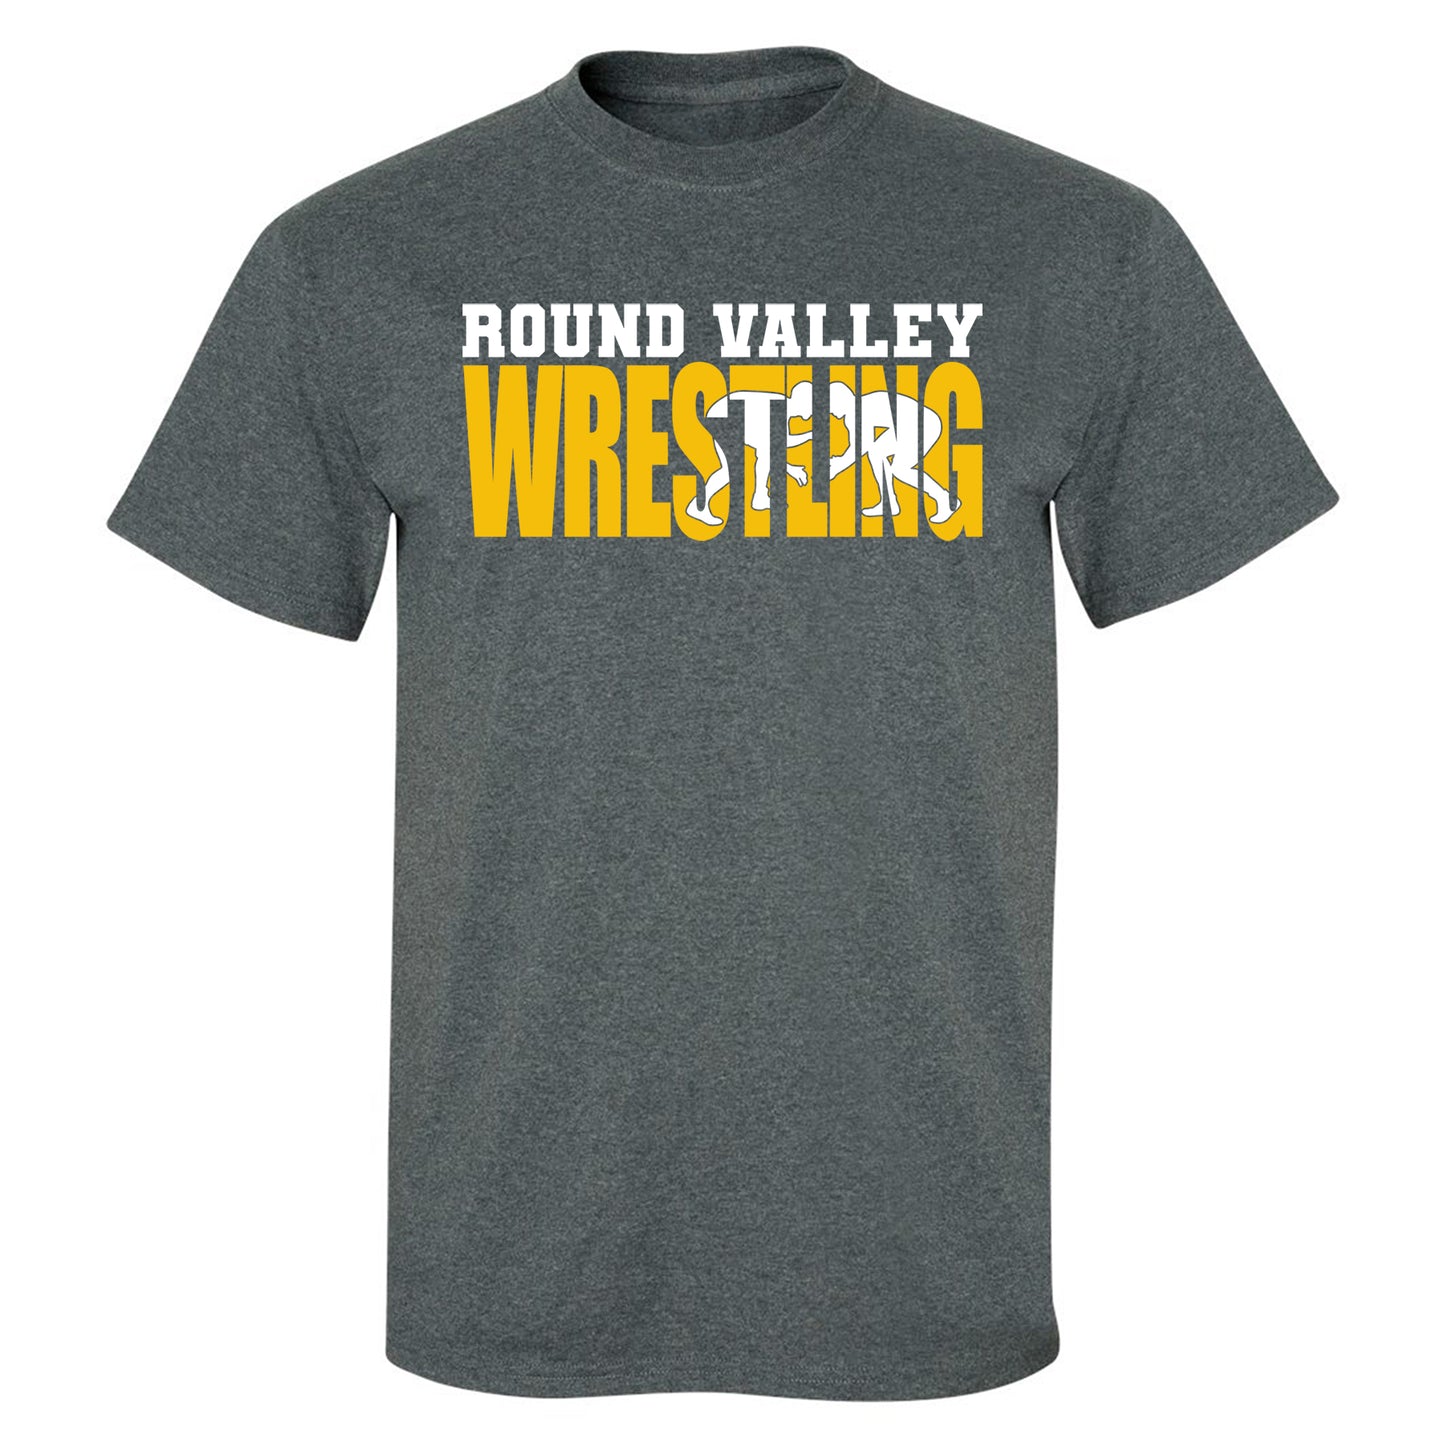 Round Valley Wrestling in Text - ADULT